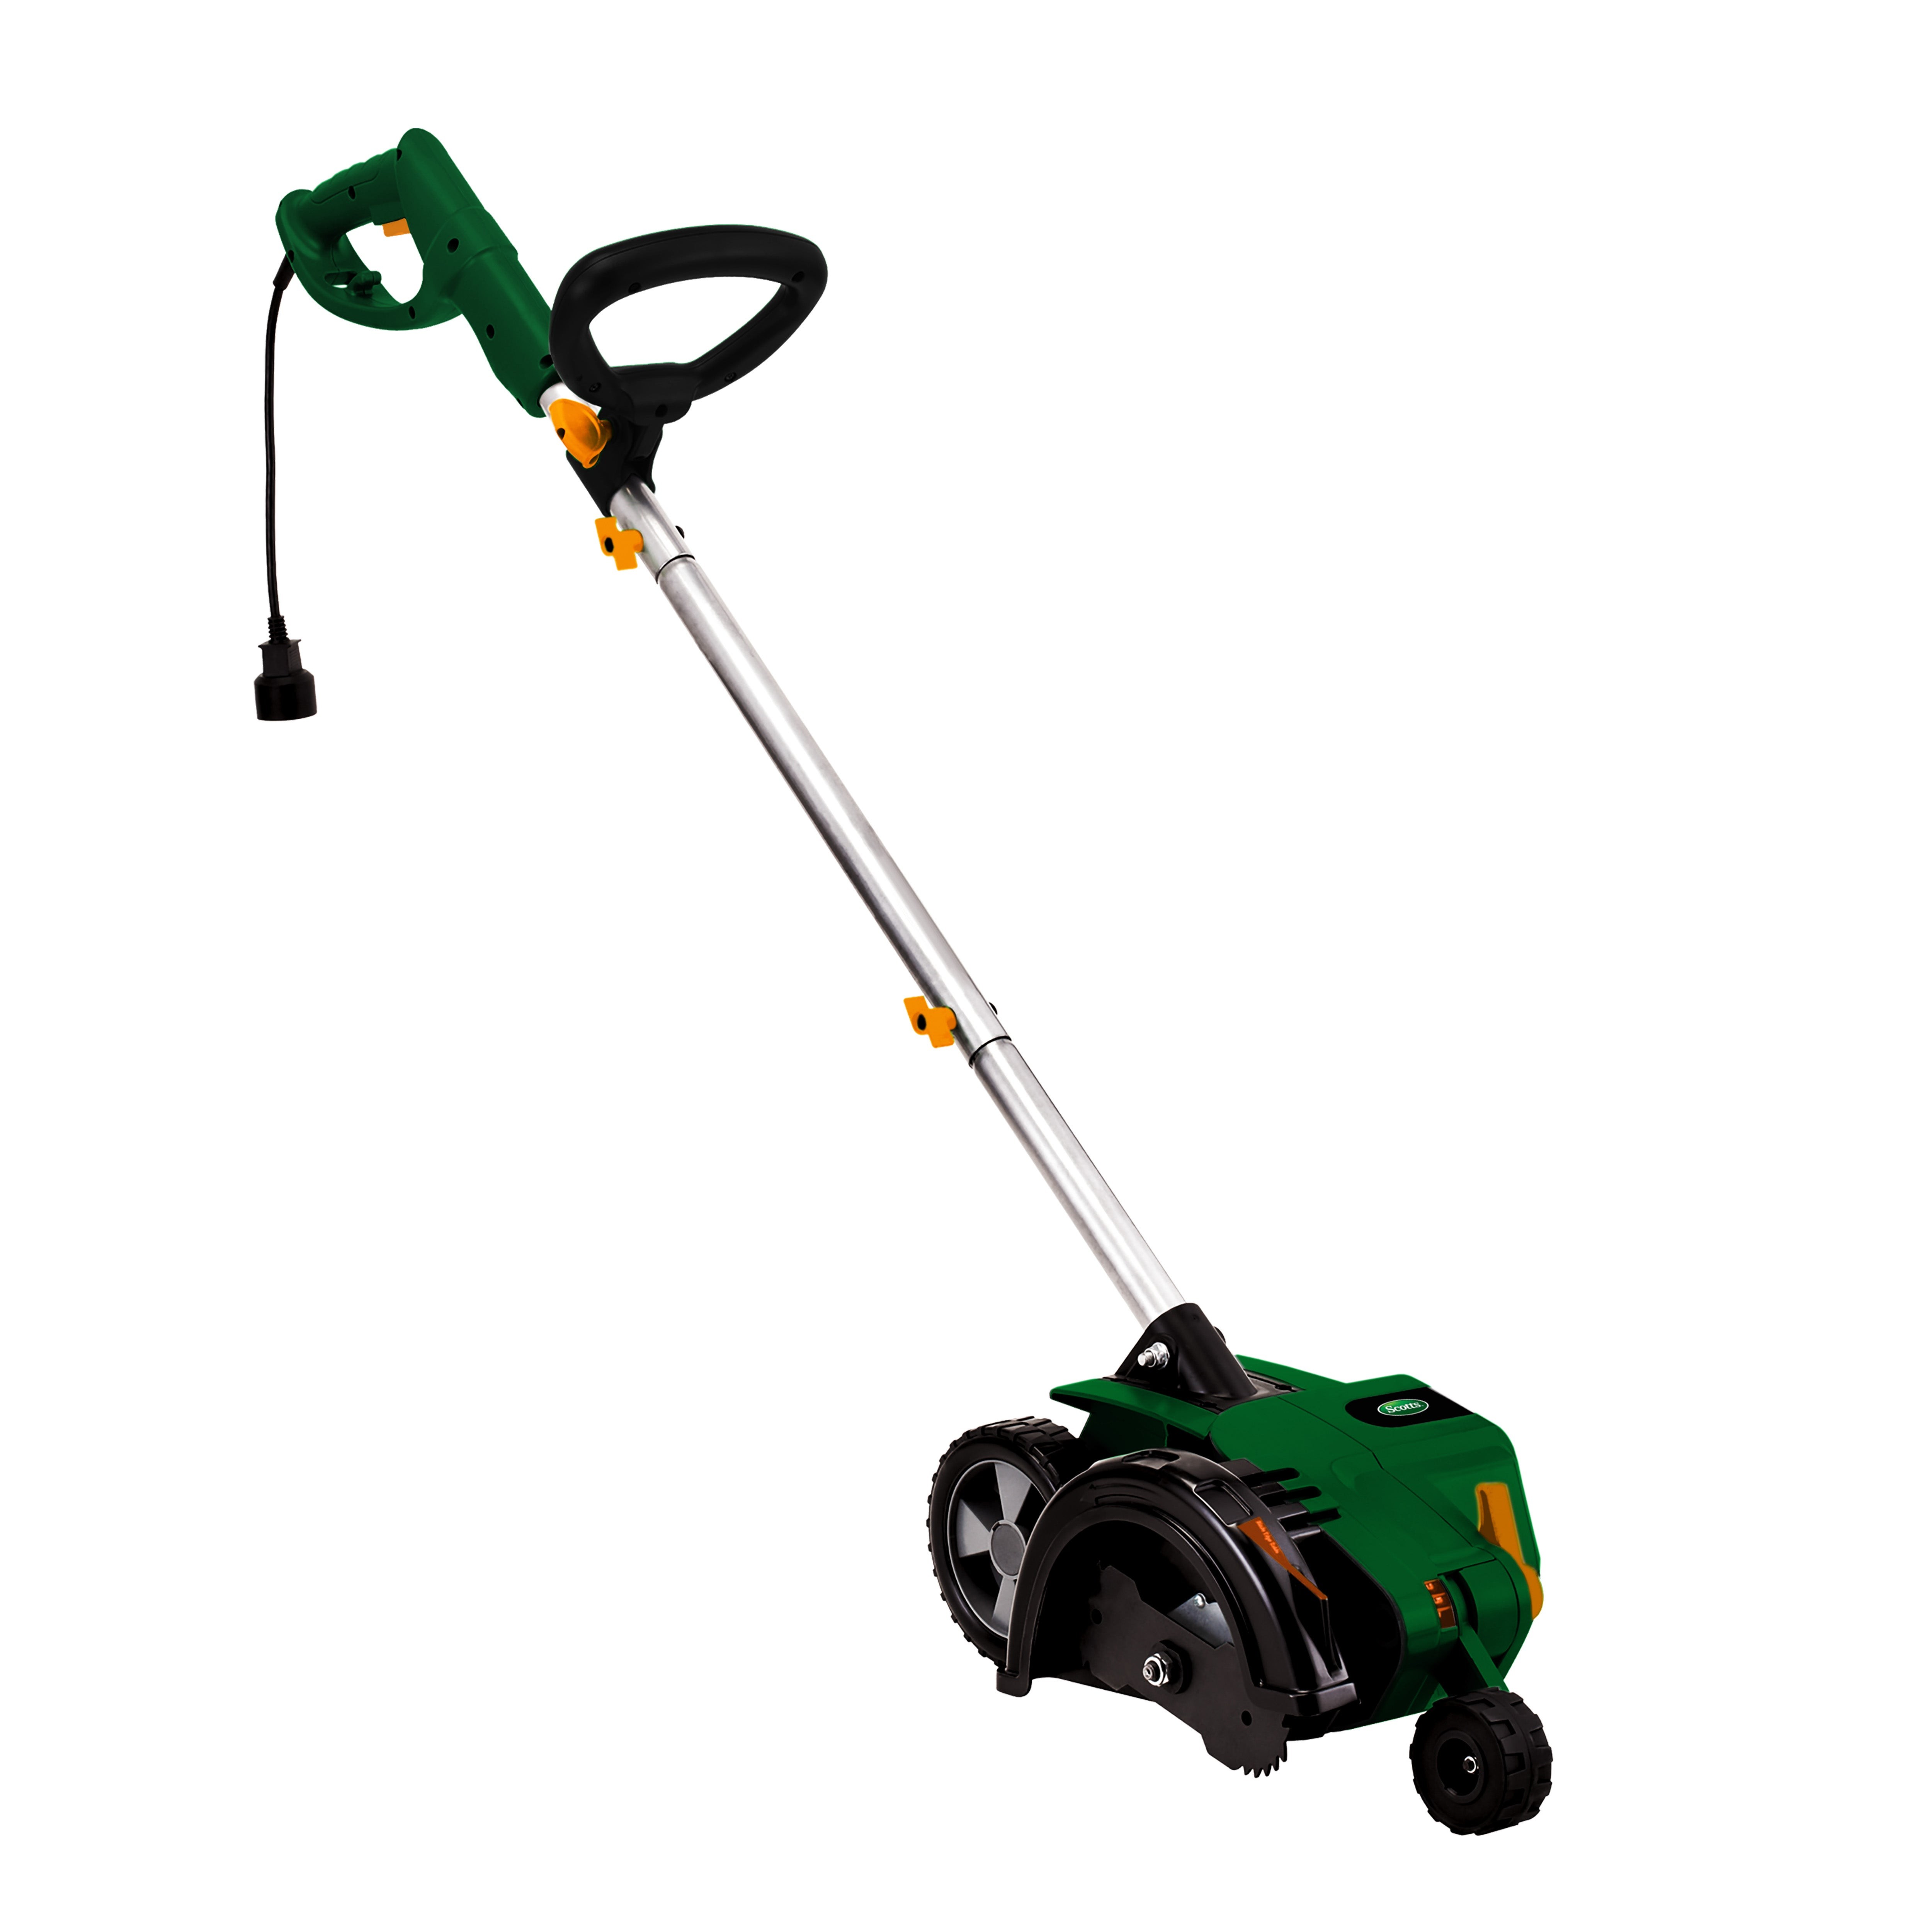 Corded Electric Lawn Edger